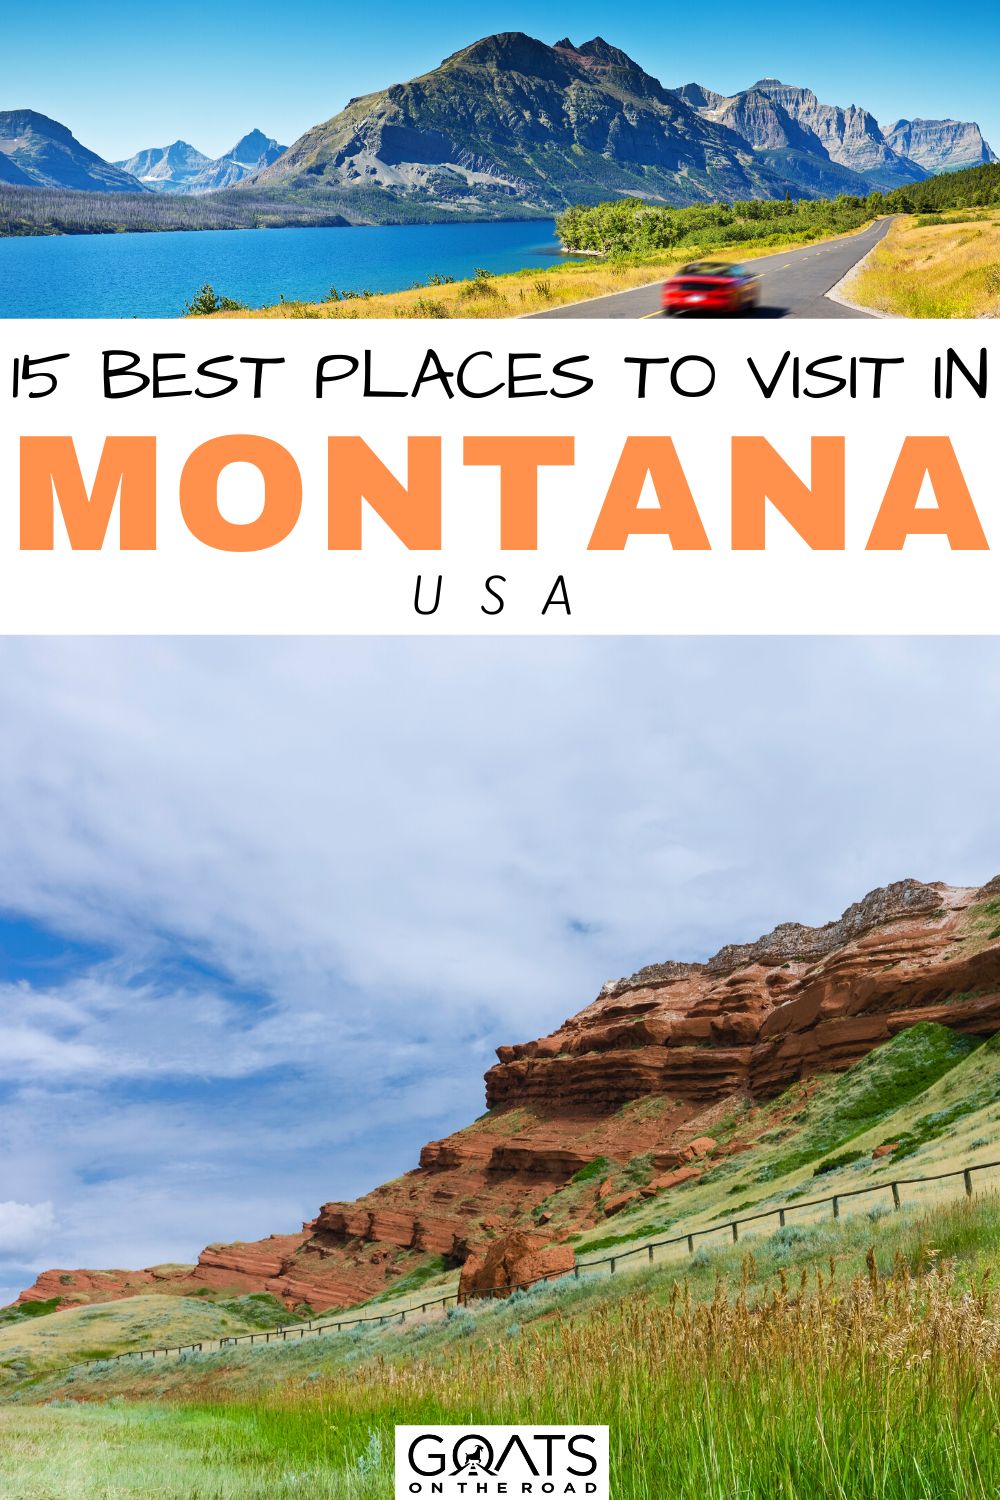 “15 Best Places To Visit in Montana, USA